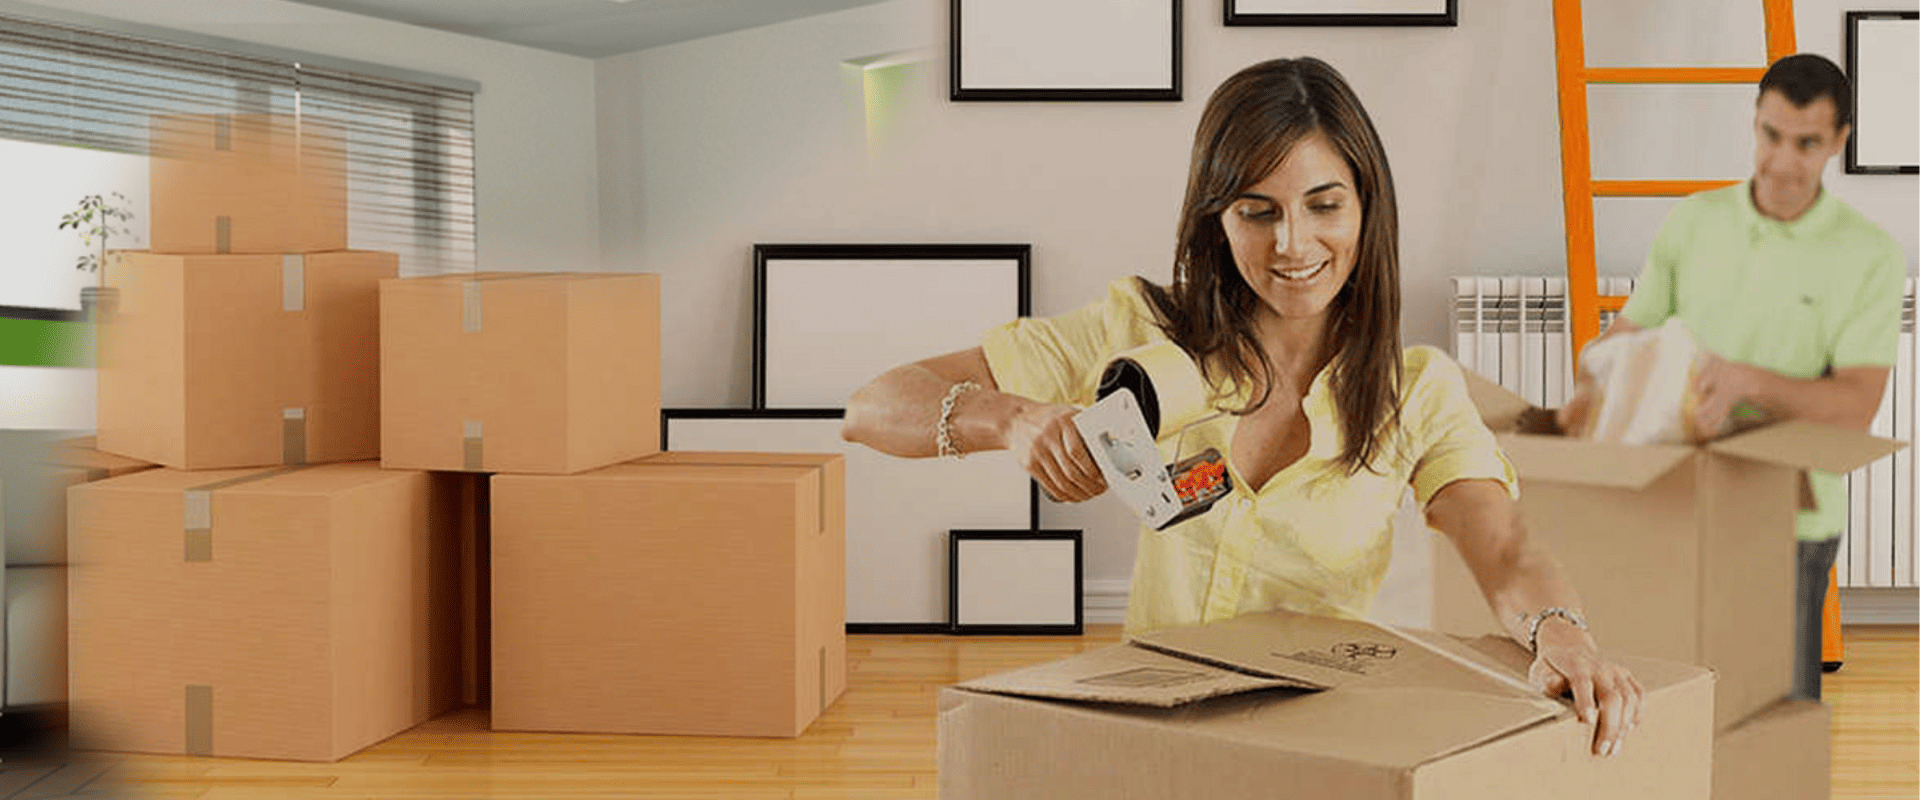 Welcome To M Agarwal Packers and Movers